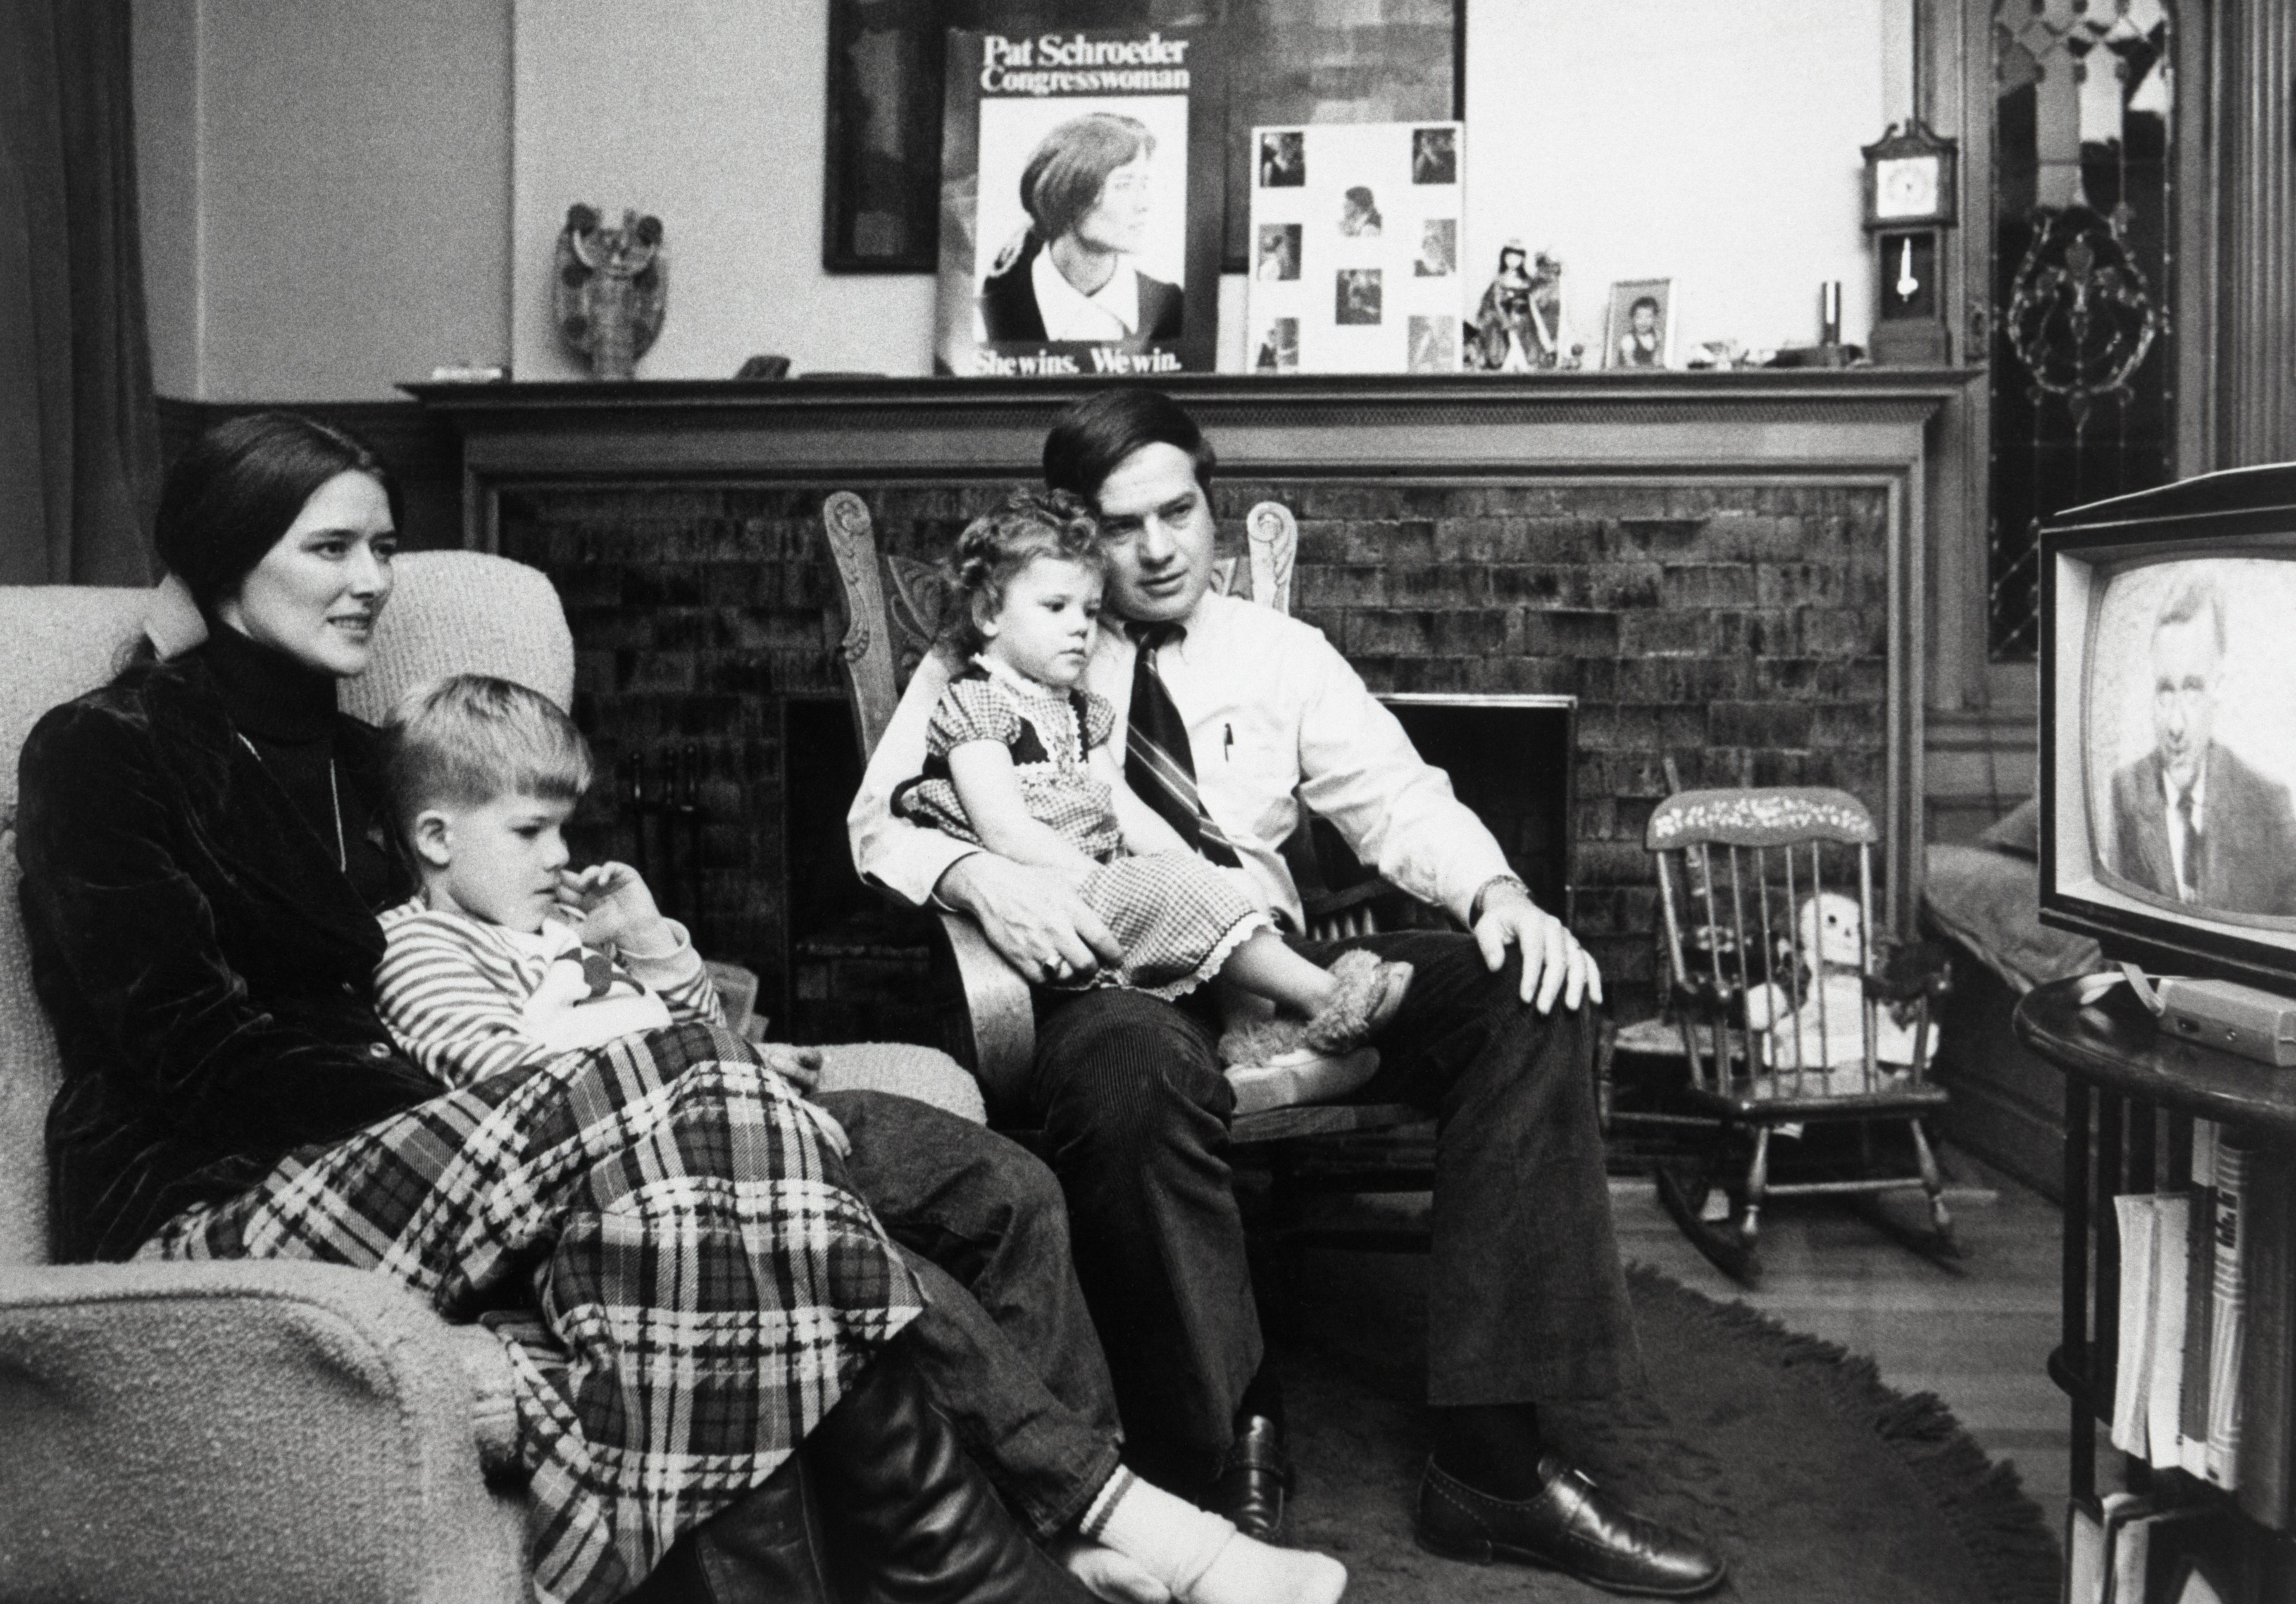 Lady Democrat, Pat Schroeder enjoys election results with her family early 11/8. Mrs. Schroeder upset Republican Mike McKevitt to win a seat in the US Congress. Mrs. Schroeder is the first woman from Colorado in the House. Pictured with Pat are; husband James W. and children Scott, 6, (right) and Jamie, 2.